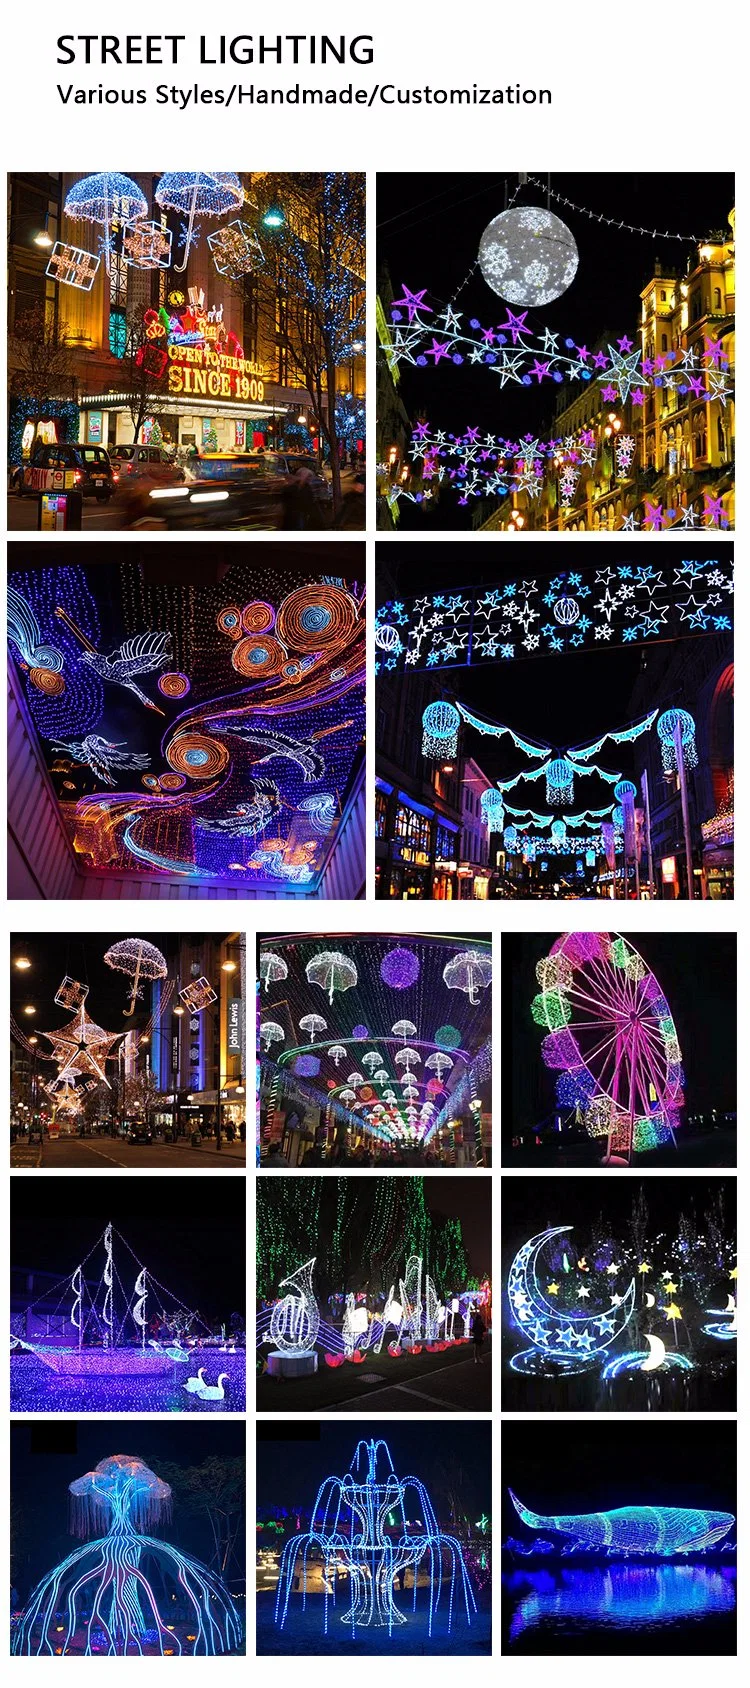 LED Motif Moon Model Lights Christmas Holiday Decoration Lamps Artificial Giant Winter Festival Decorative Street